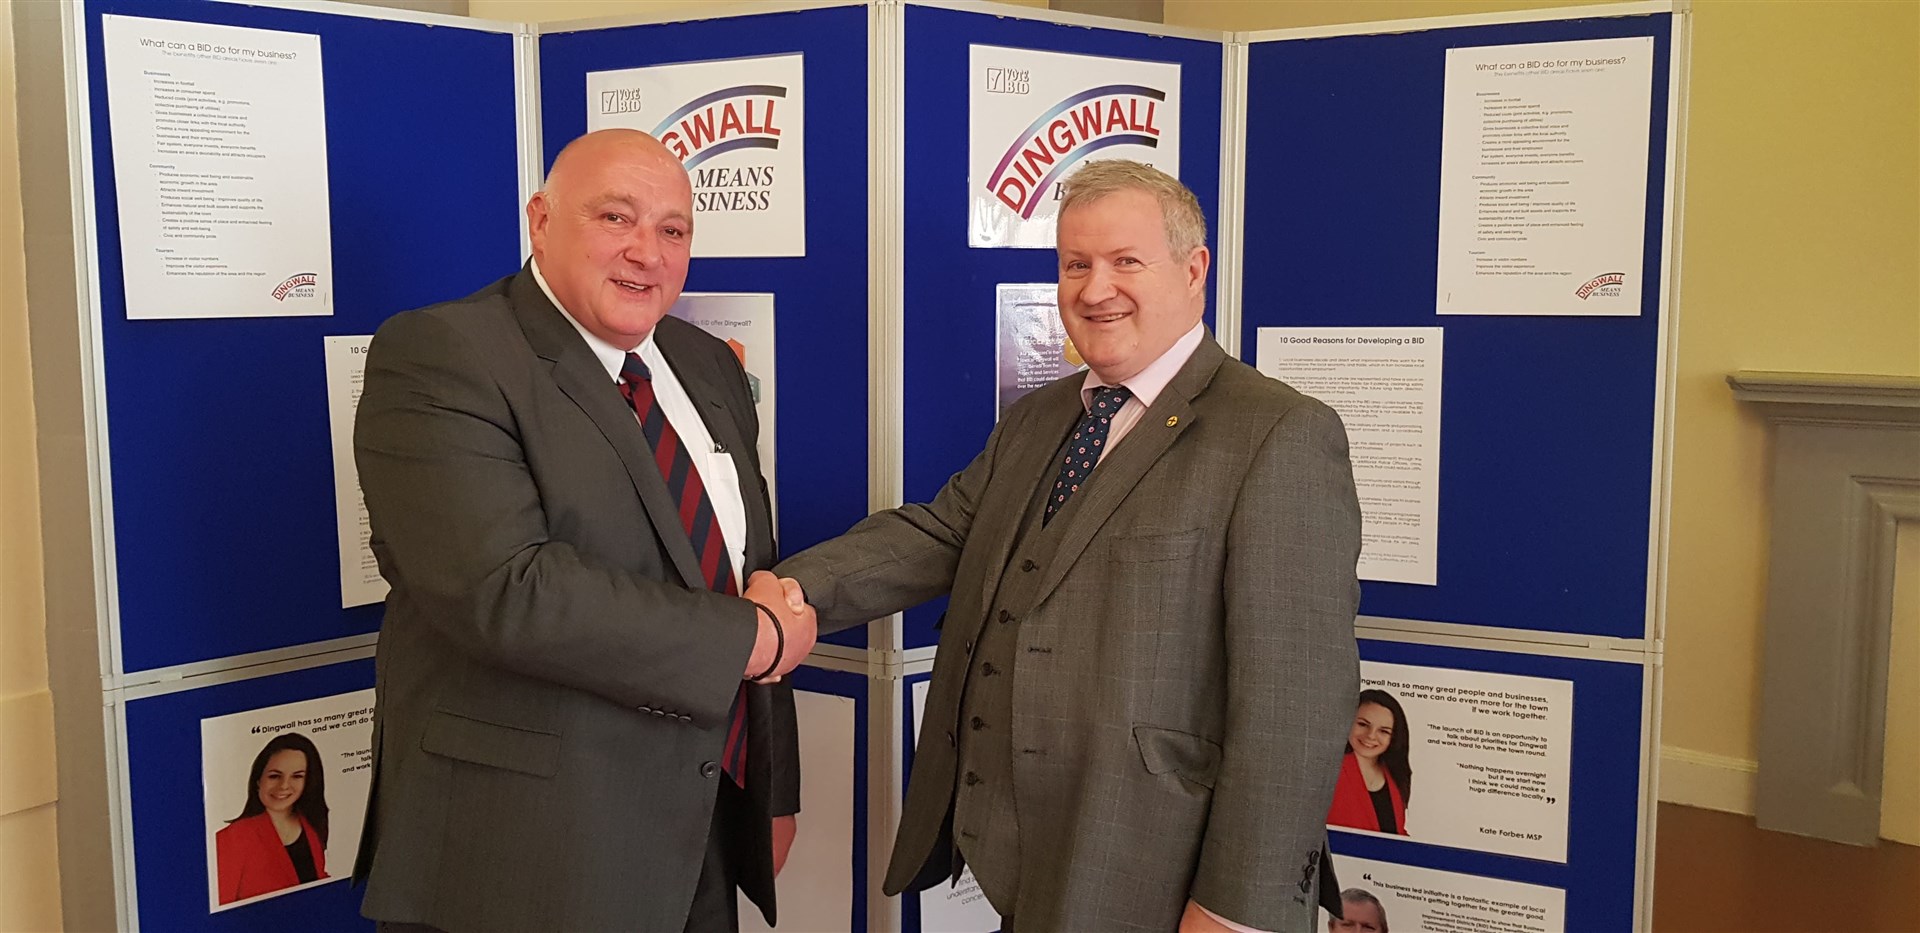 Bid project manager George Murray and MP Ian Blackford. Mr Blackford believes Dingwall can "benefit hugely" if it pulls together behind a business improvement district (BID) drive.